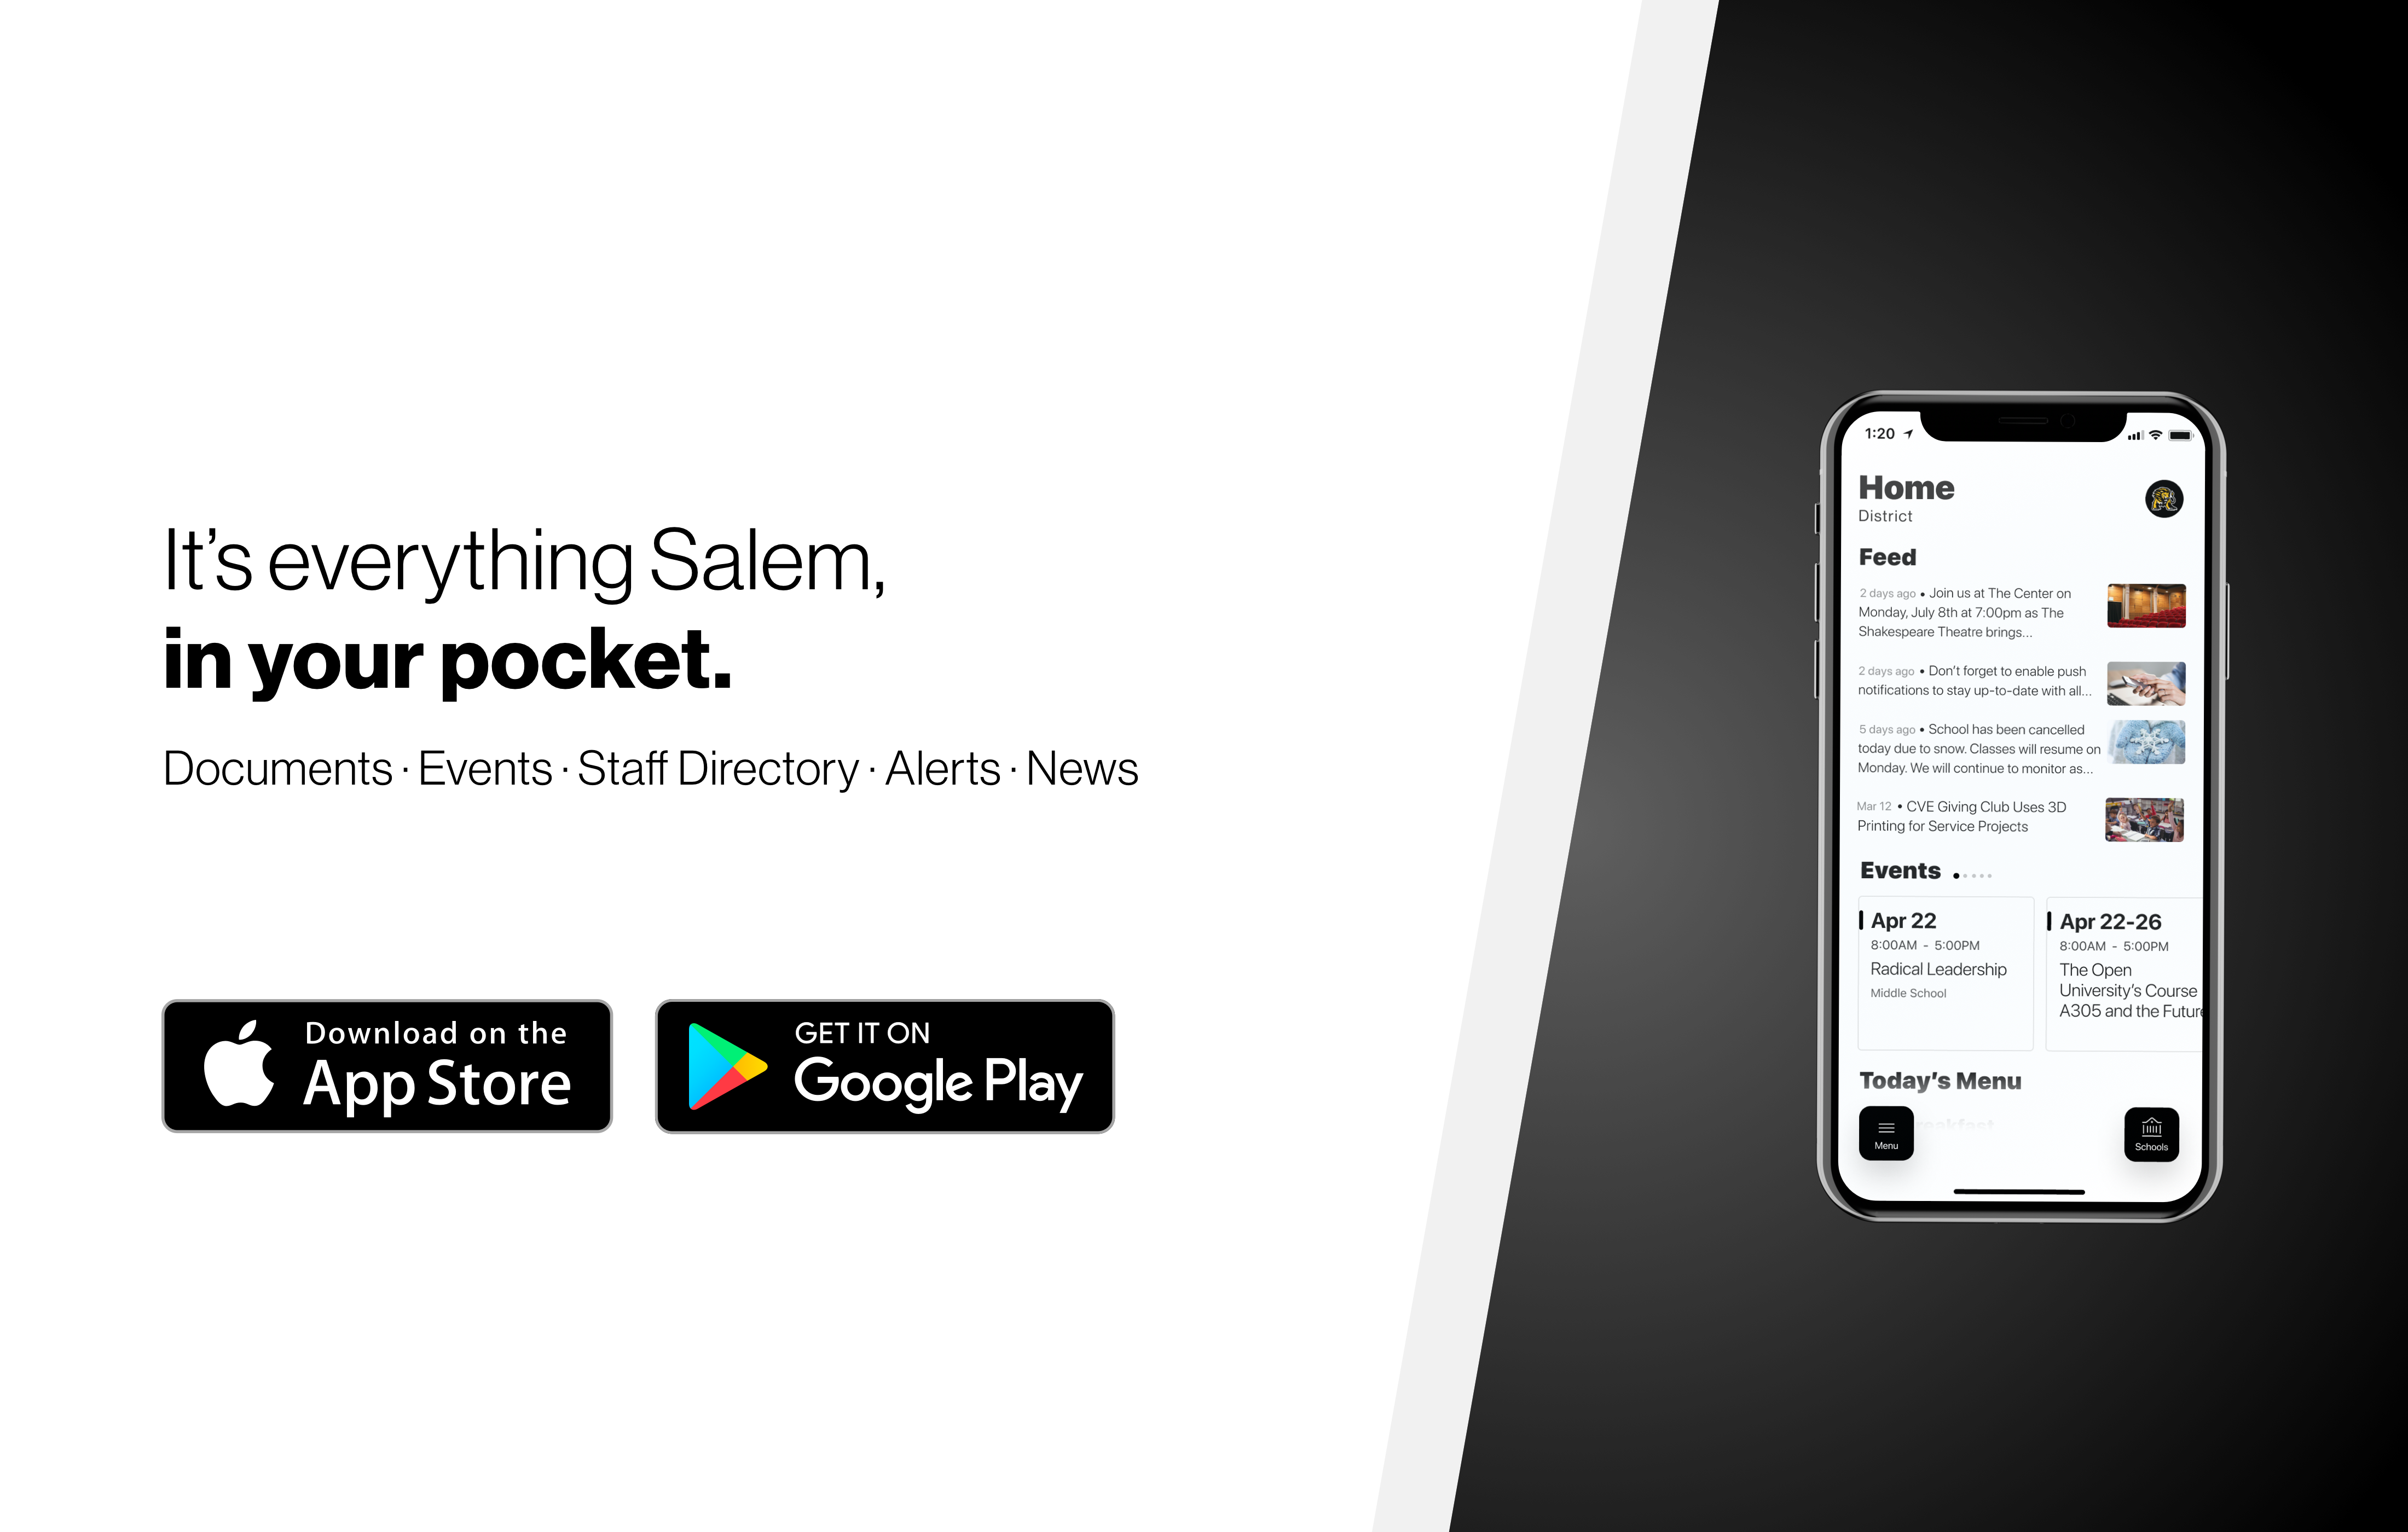 Advertisement for downloading Salem's mobile app. Links to App Store and Google Play are in website's footer